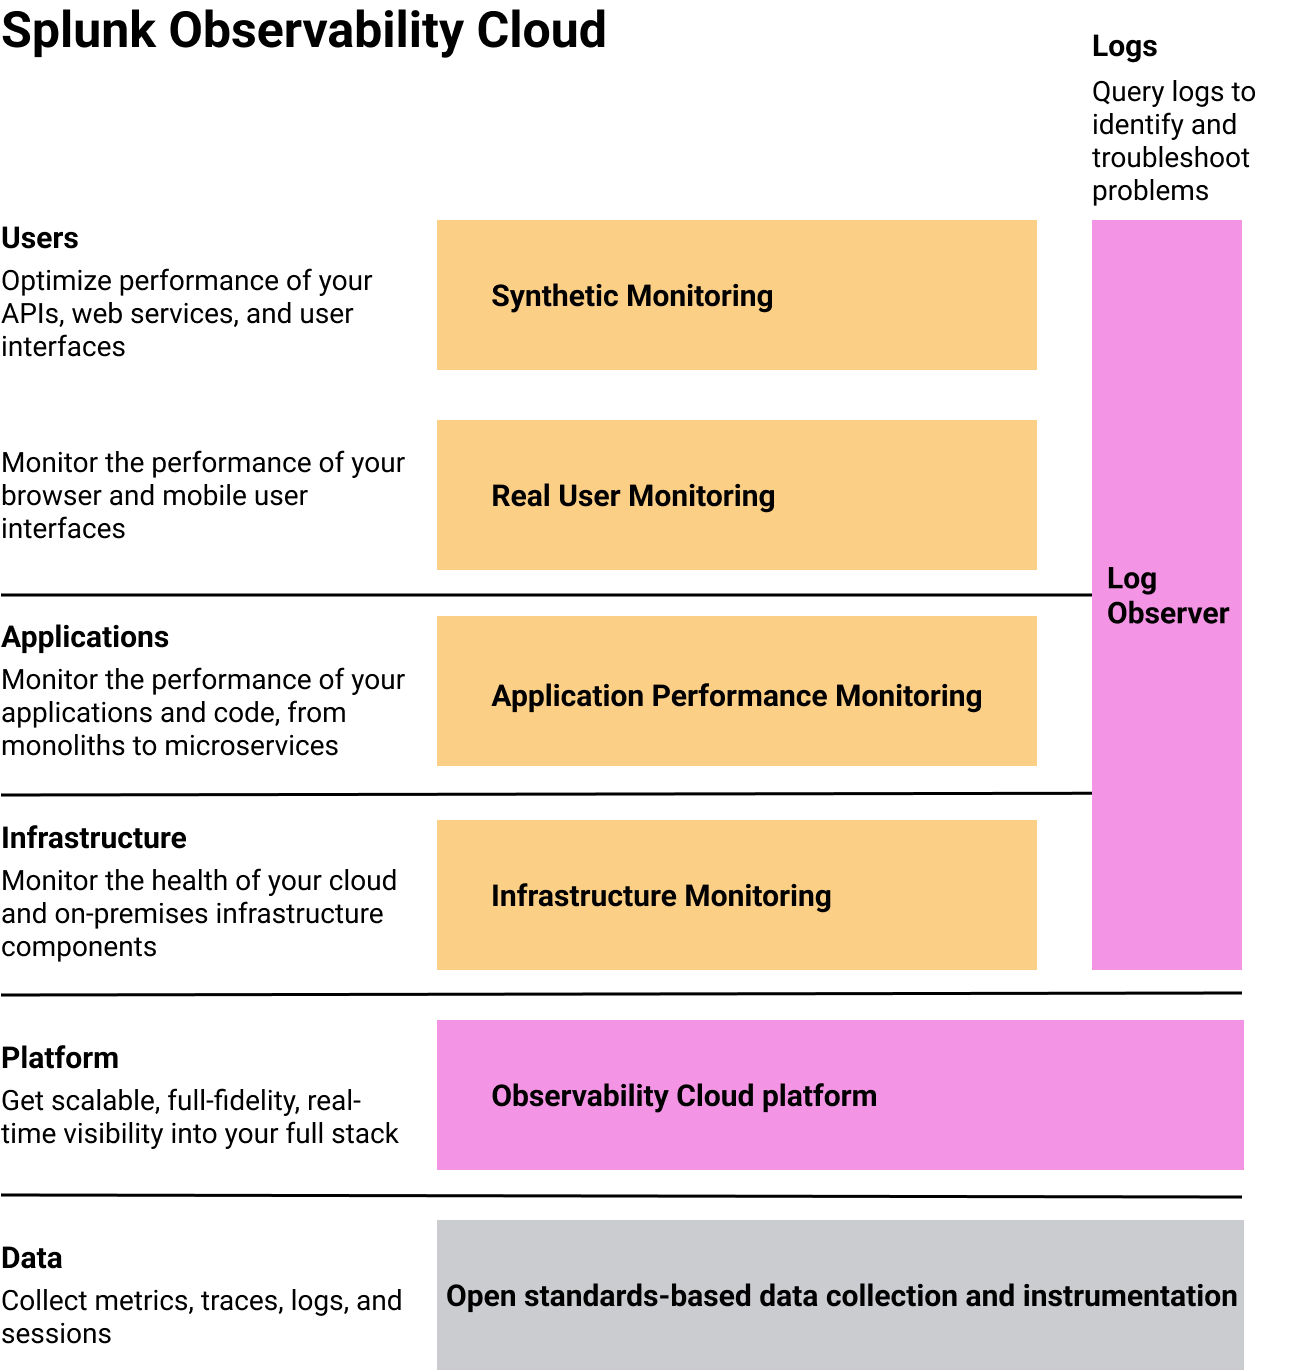 This screenshot shows how Observability Cloud products serve the different layers and processes in an organization's environment.